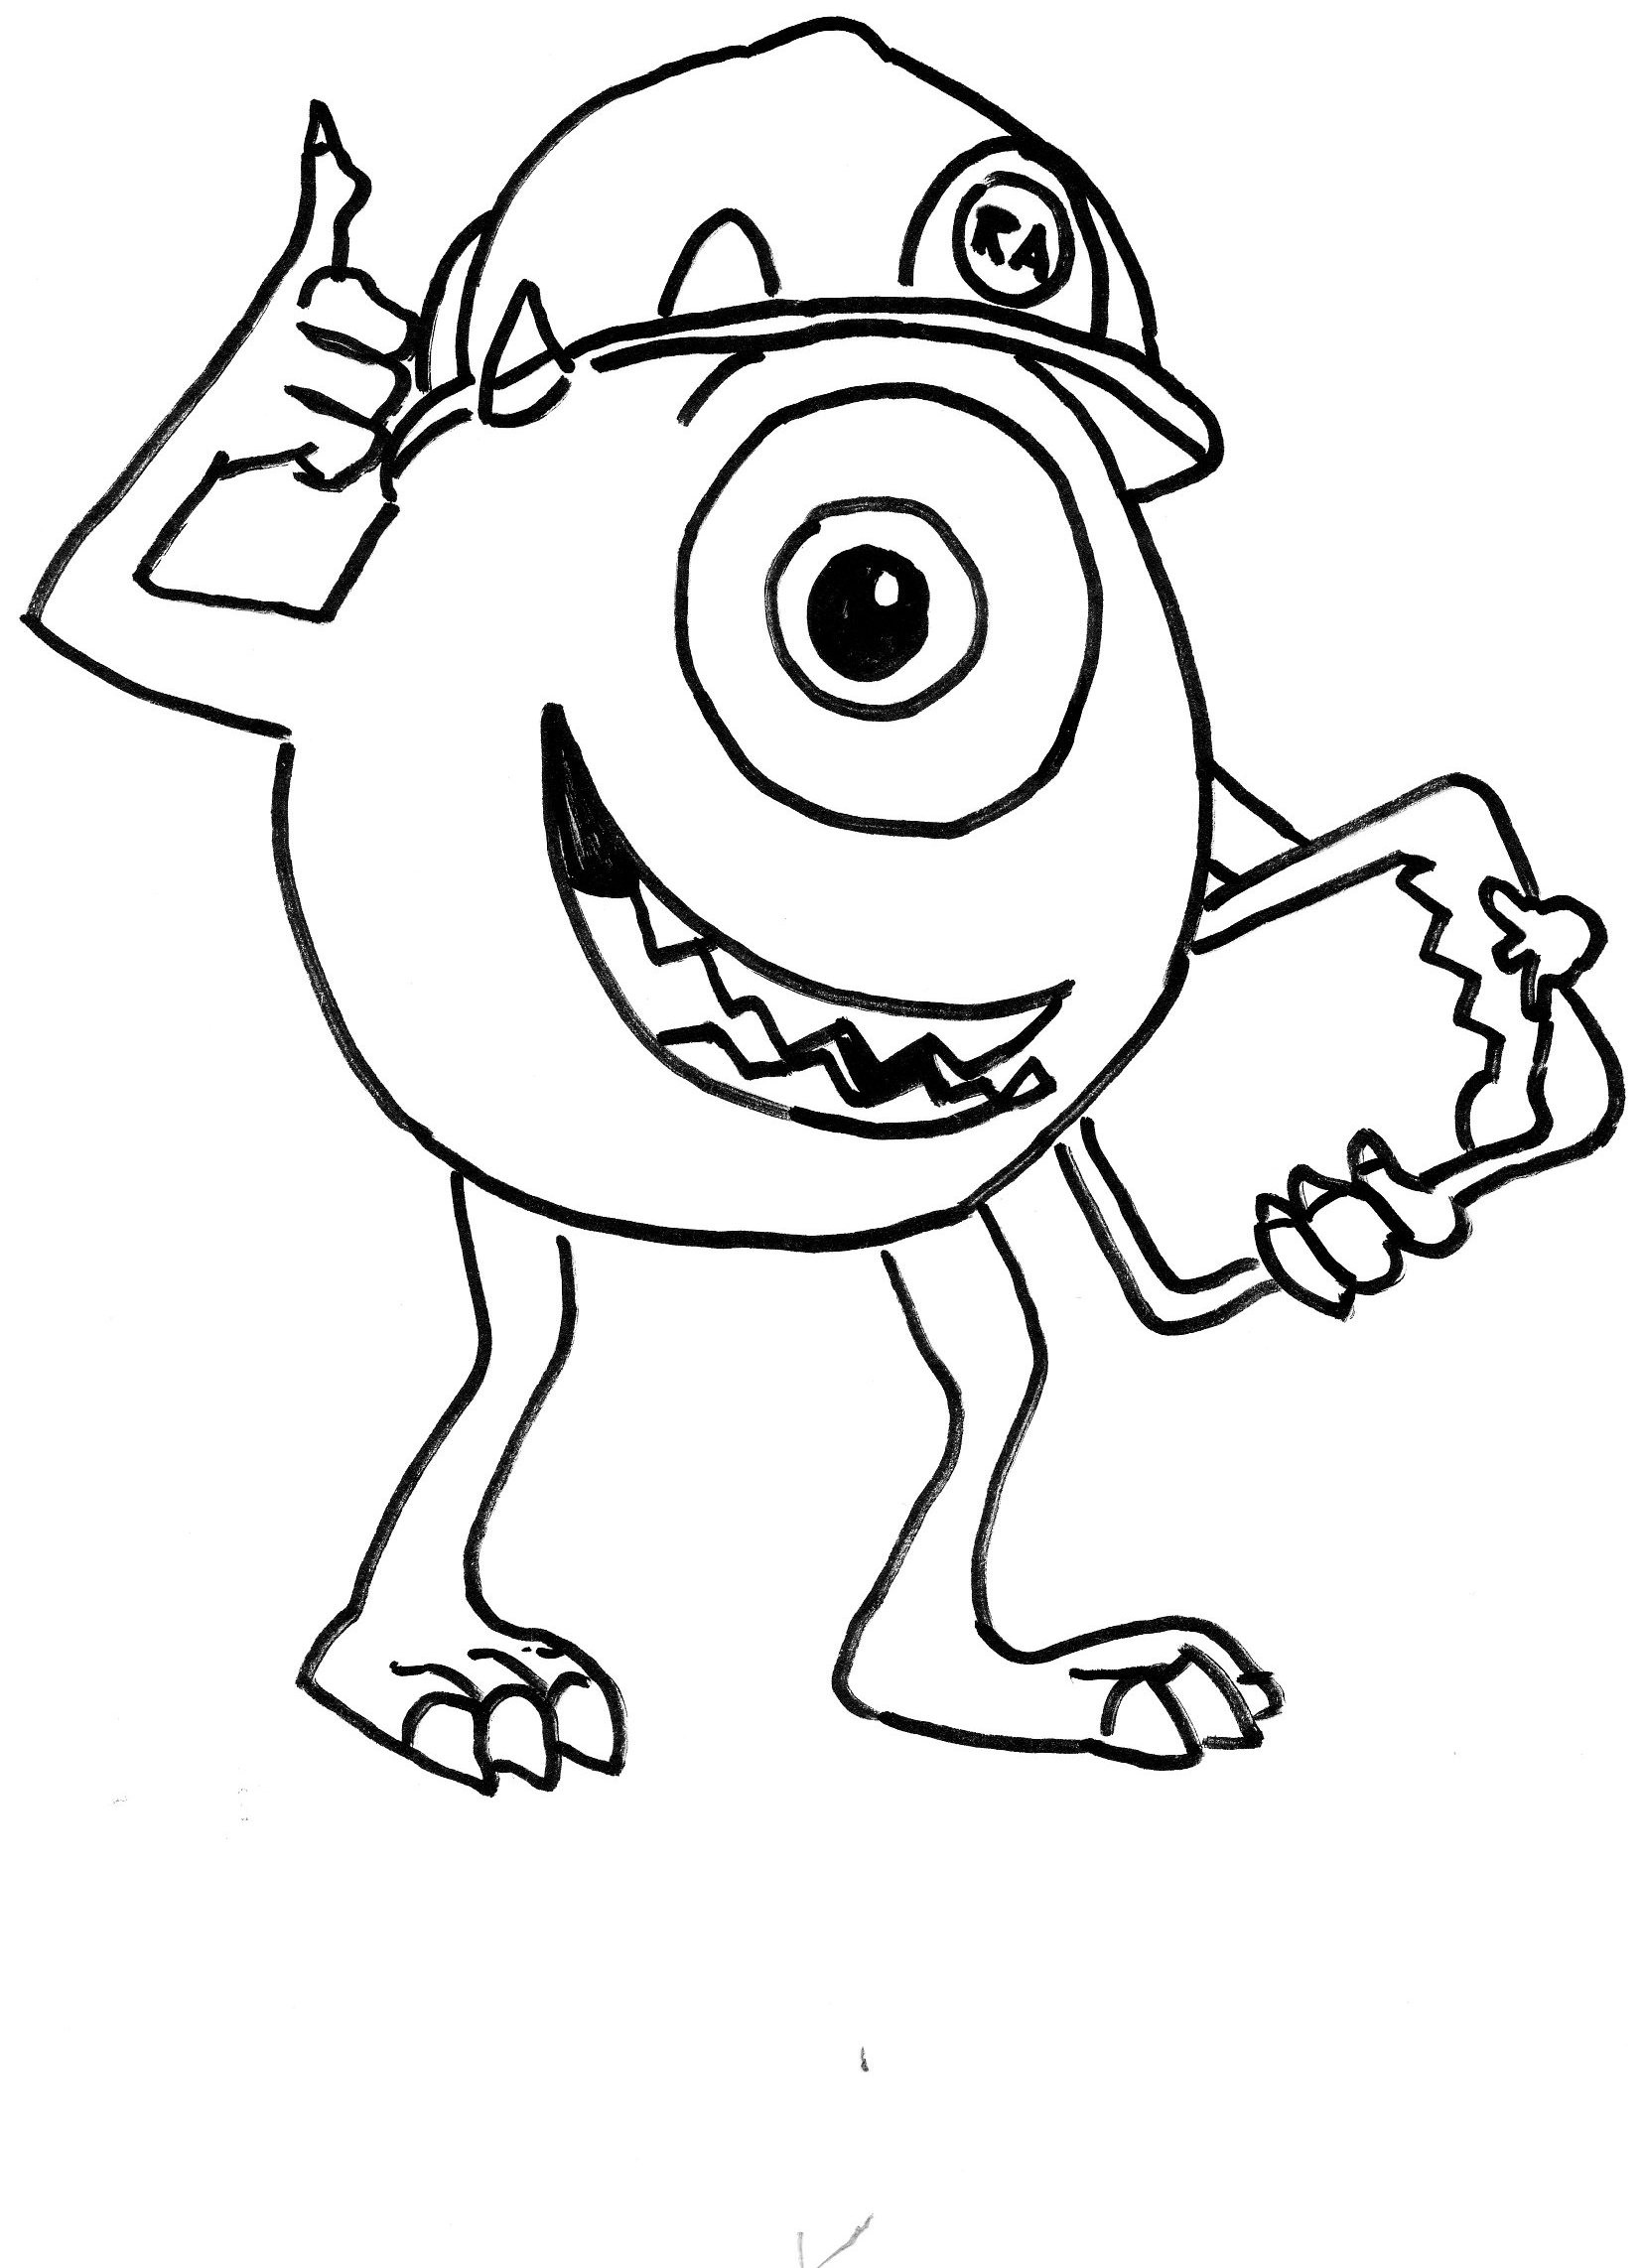 Boys Coloring Pages Online
 Coloring Pages for Boys 2018 Dr Odd